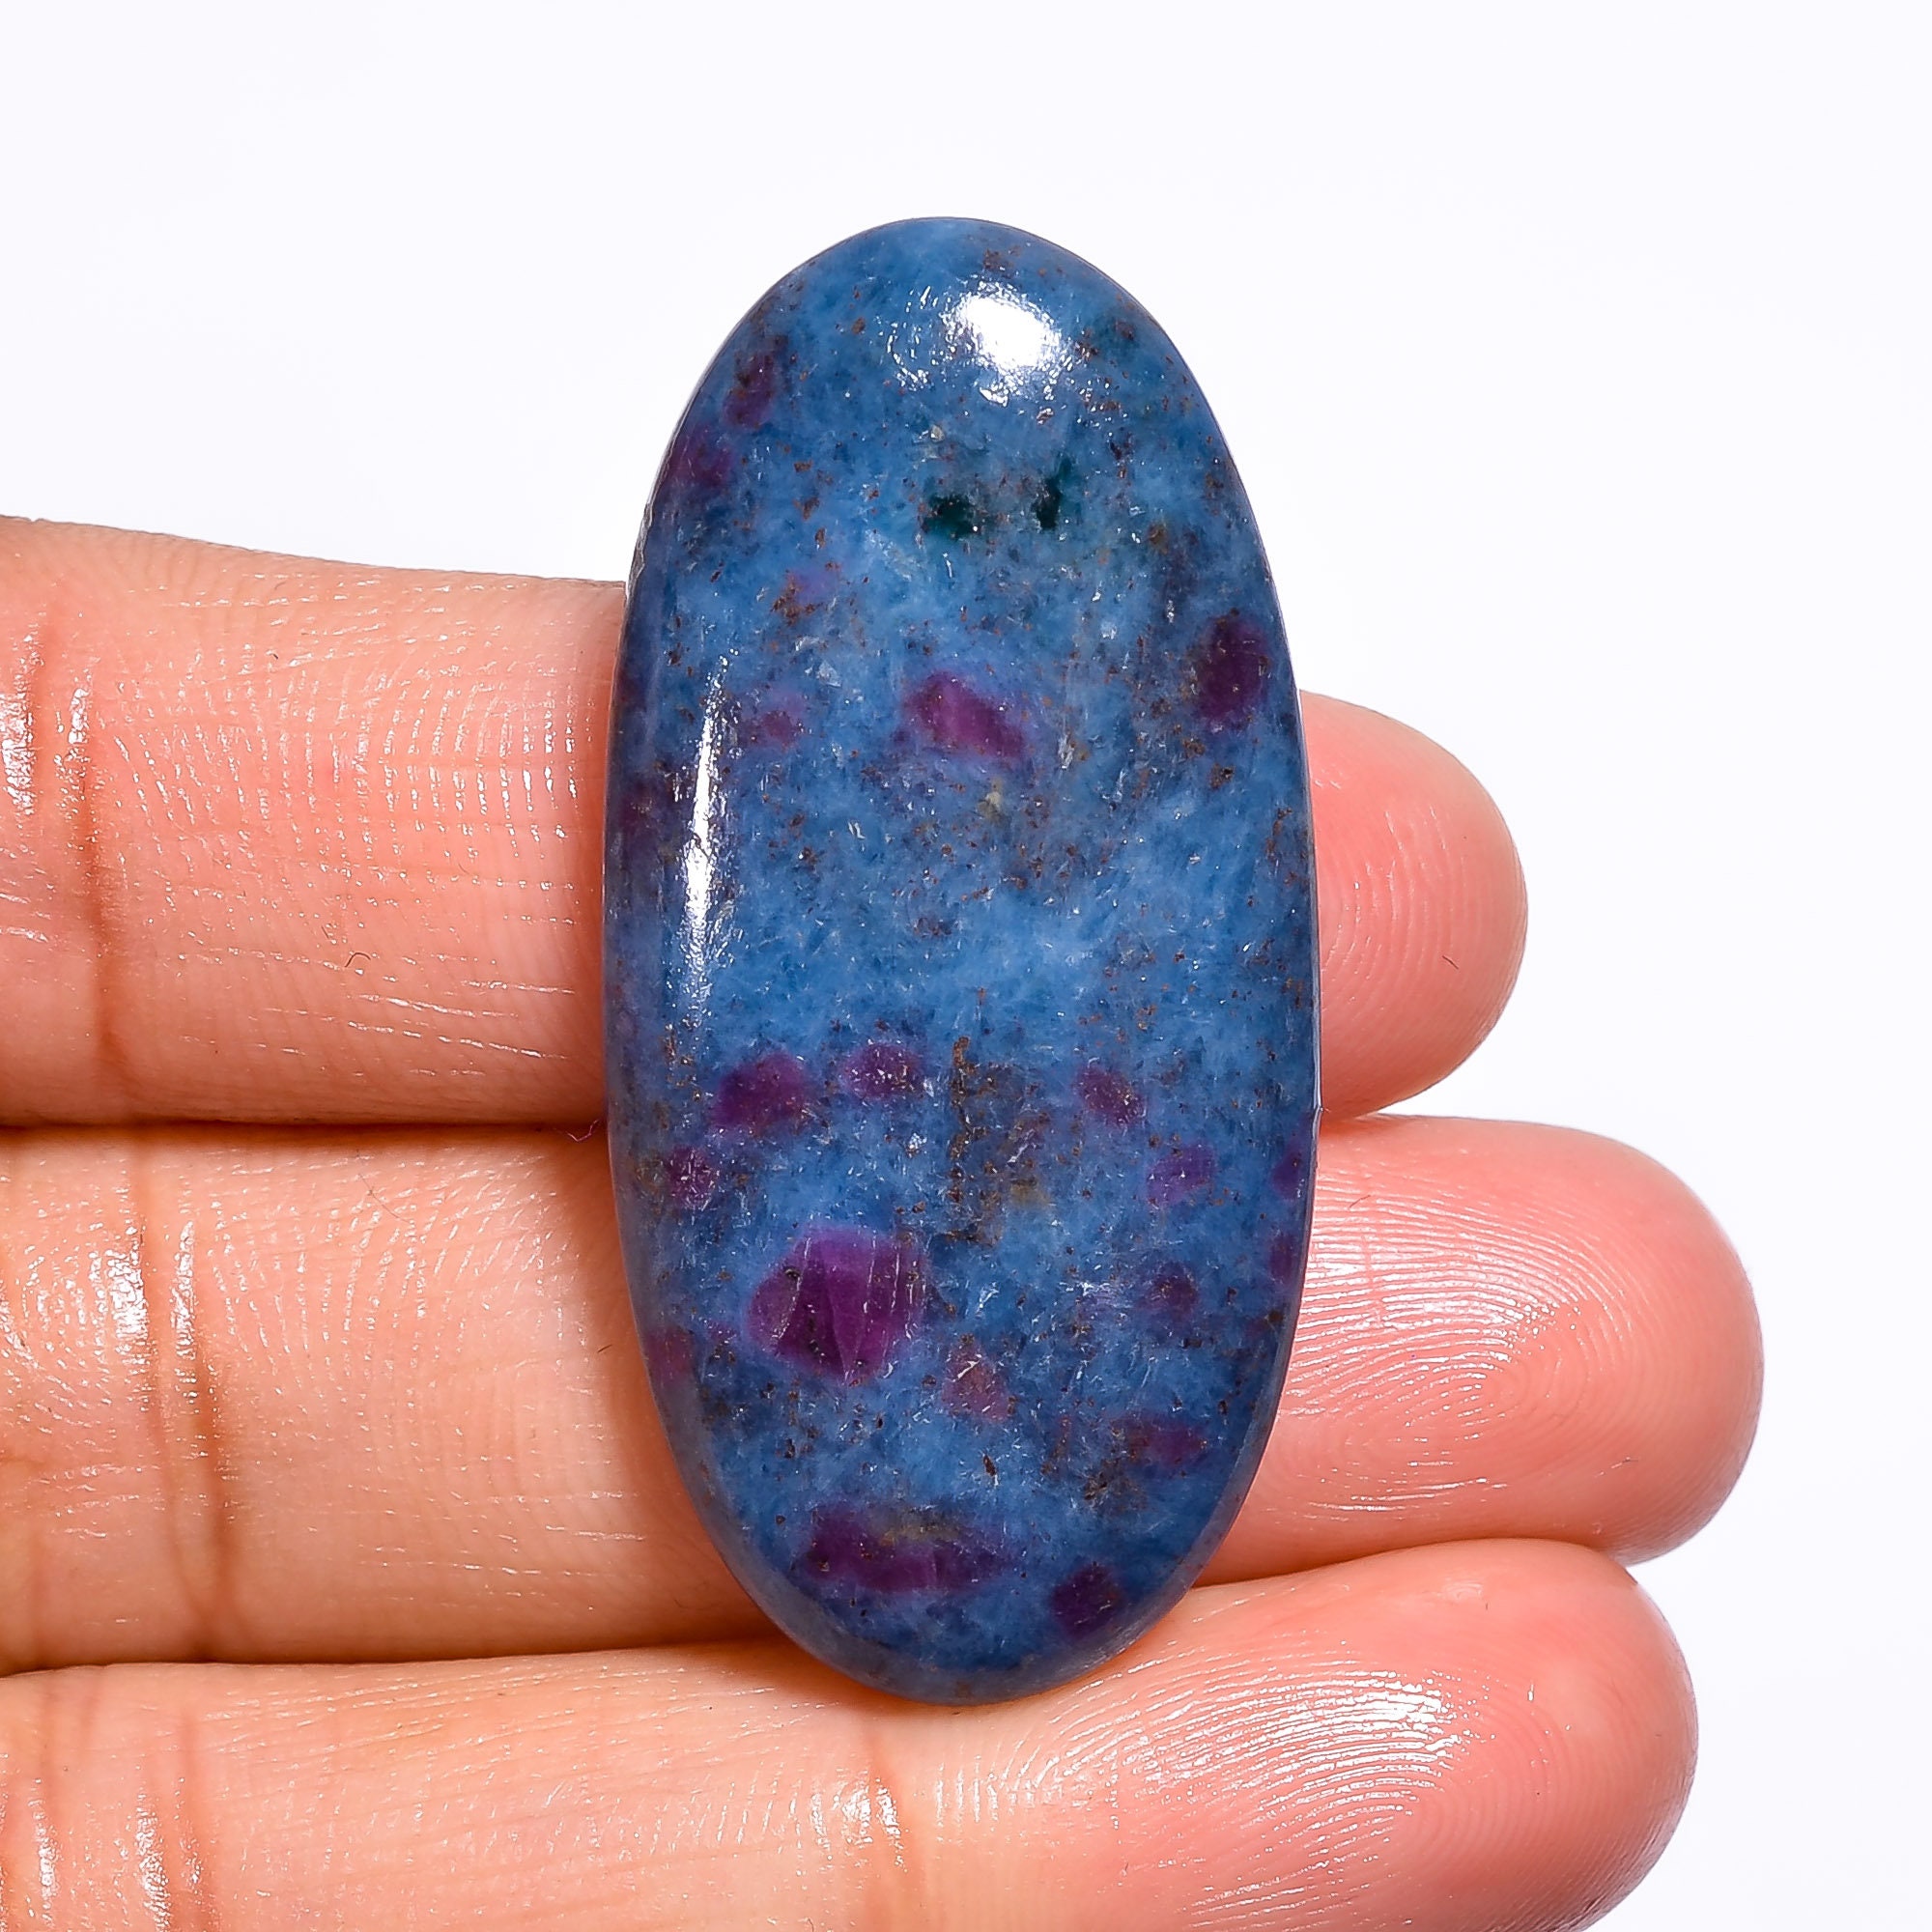 Top Grade Quality 100% Natural Ruby Kyanite Pear Shape Cabochon Loose Gemstone For Making Jewelry 33X18X5 mm F-461 34.5 Ct